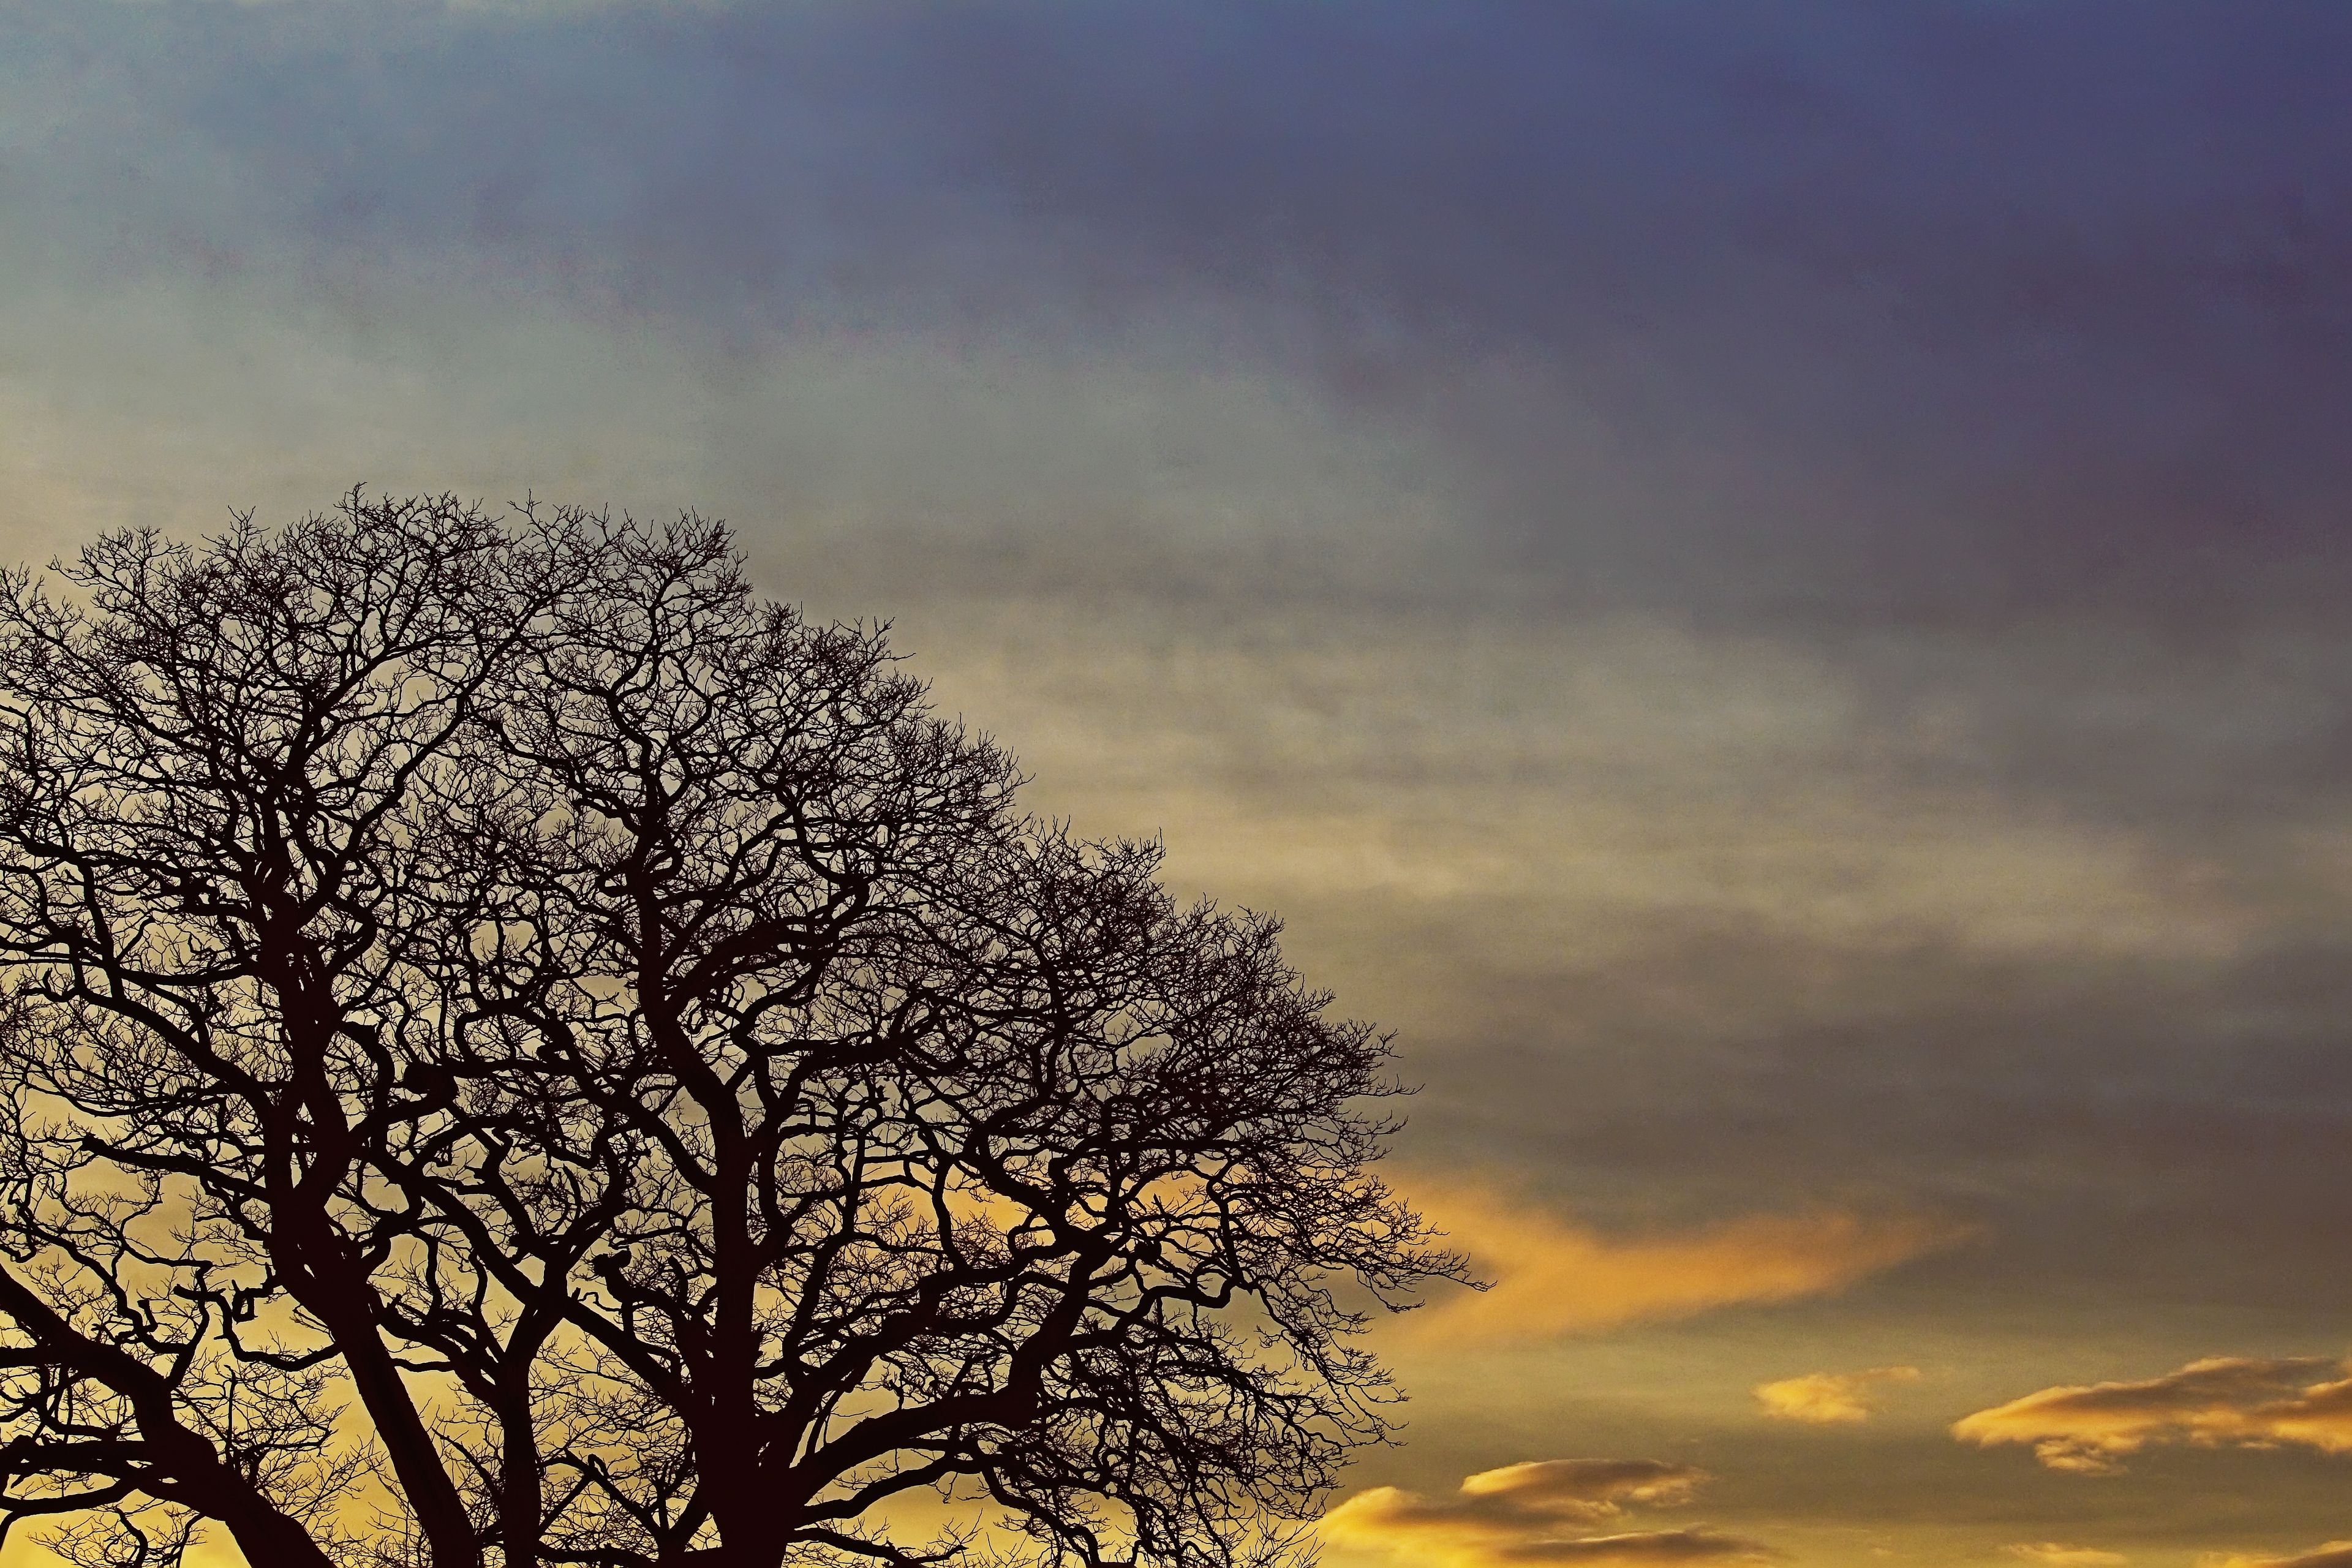 A tree without leaves is silhouetted by a sunset.